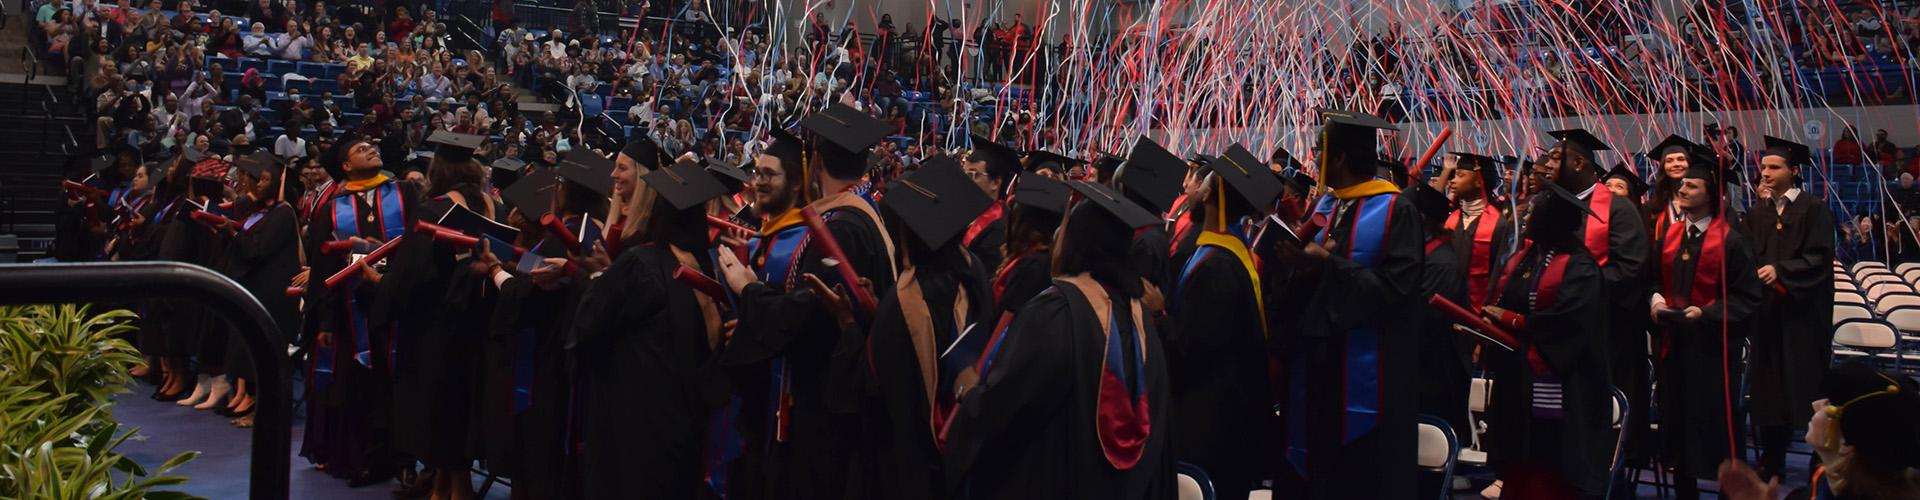 several students wearing graduation regalia with streamers in the background